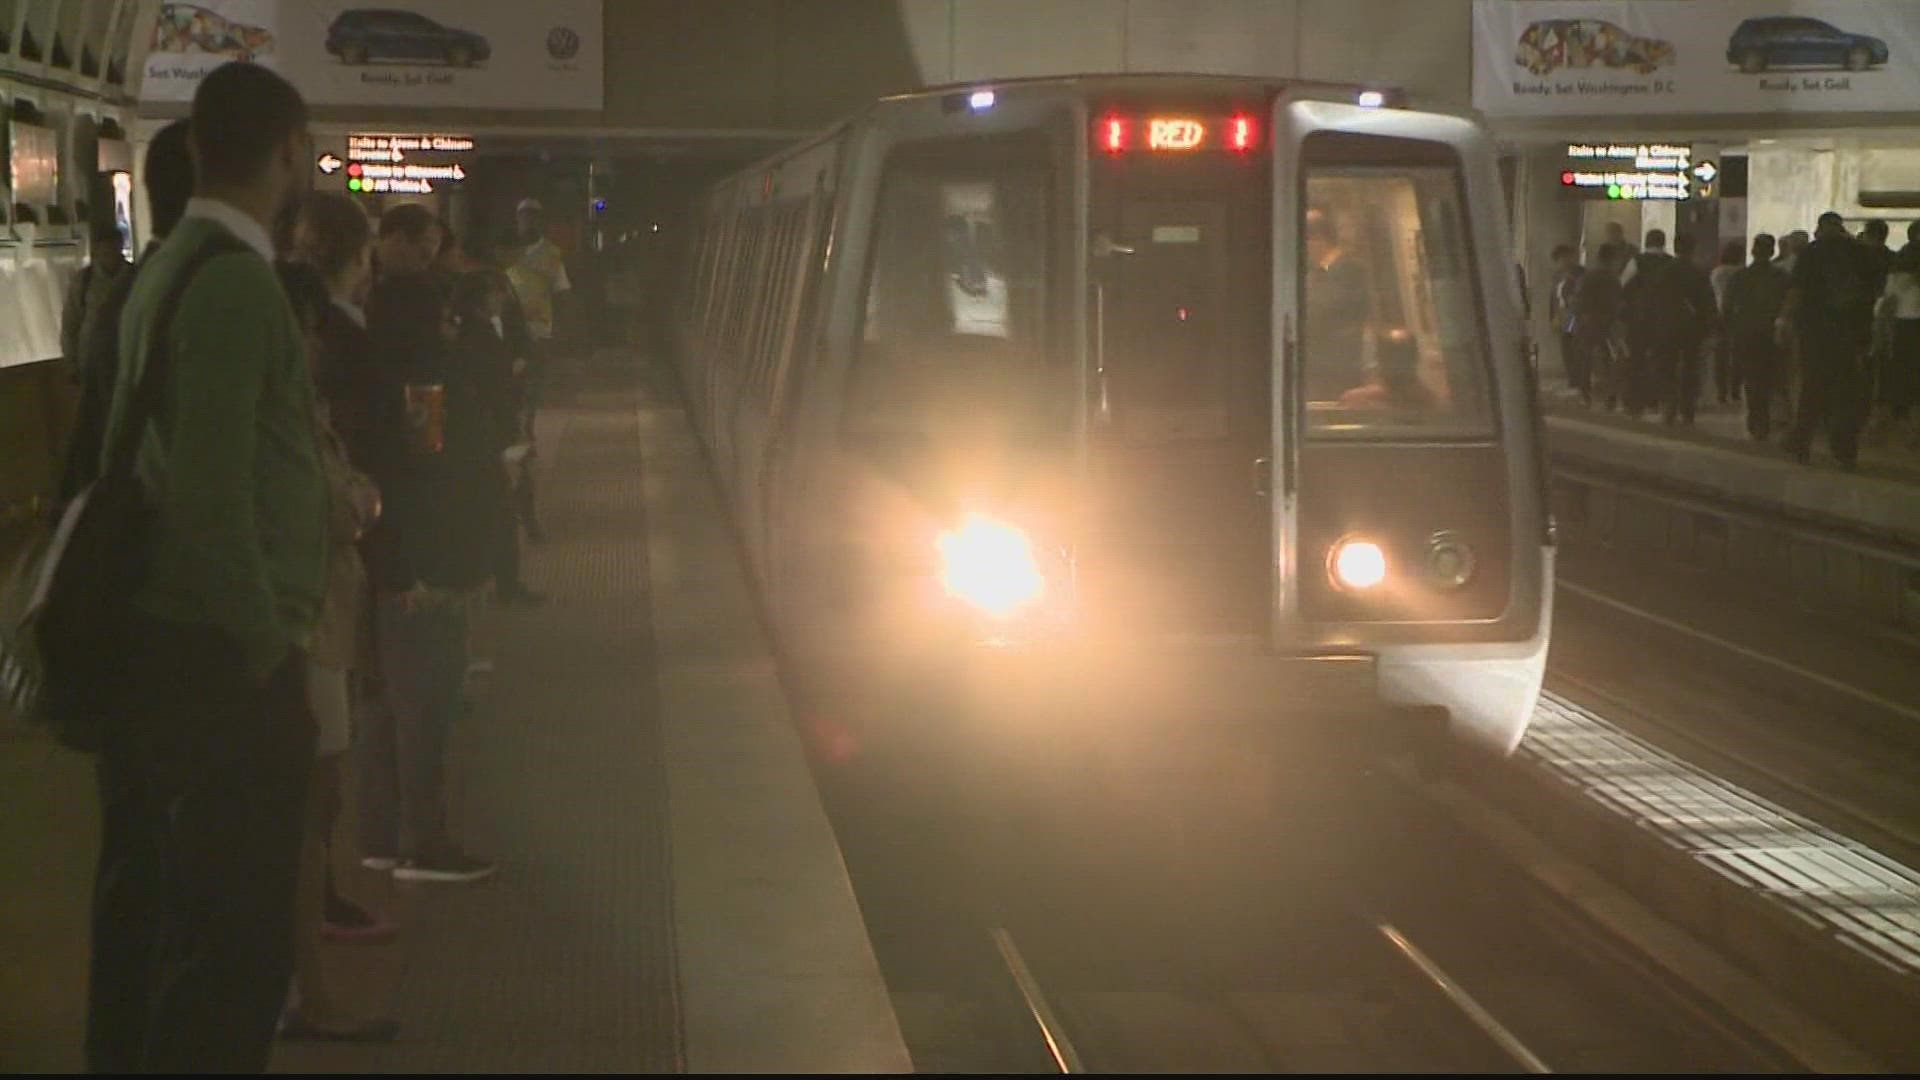 Metro train operators have been manually stopped and started trains since a 2009 Red line crash that killed nine people.